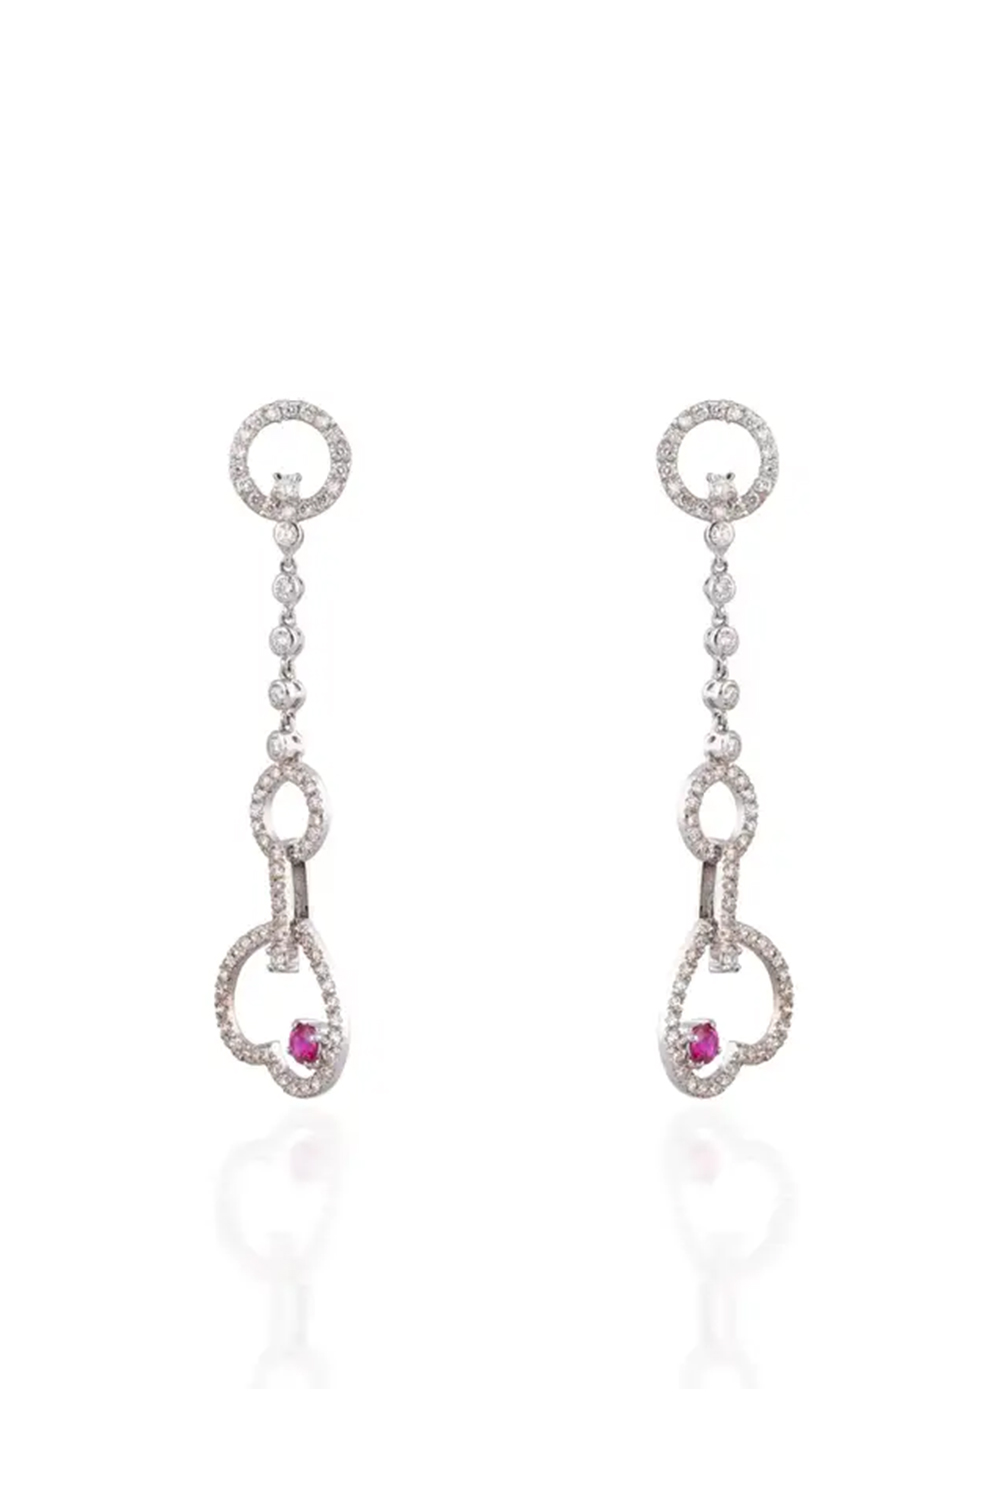 18k gold 1.52cts Diamond and 0.38cts Ruby Earring